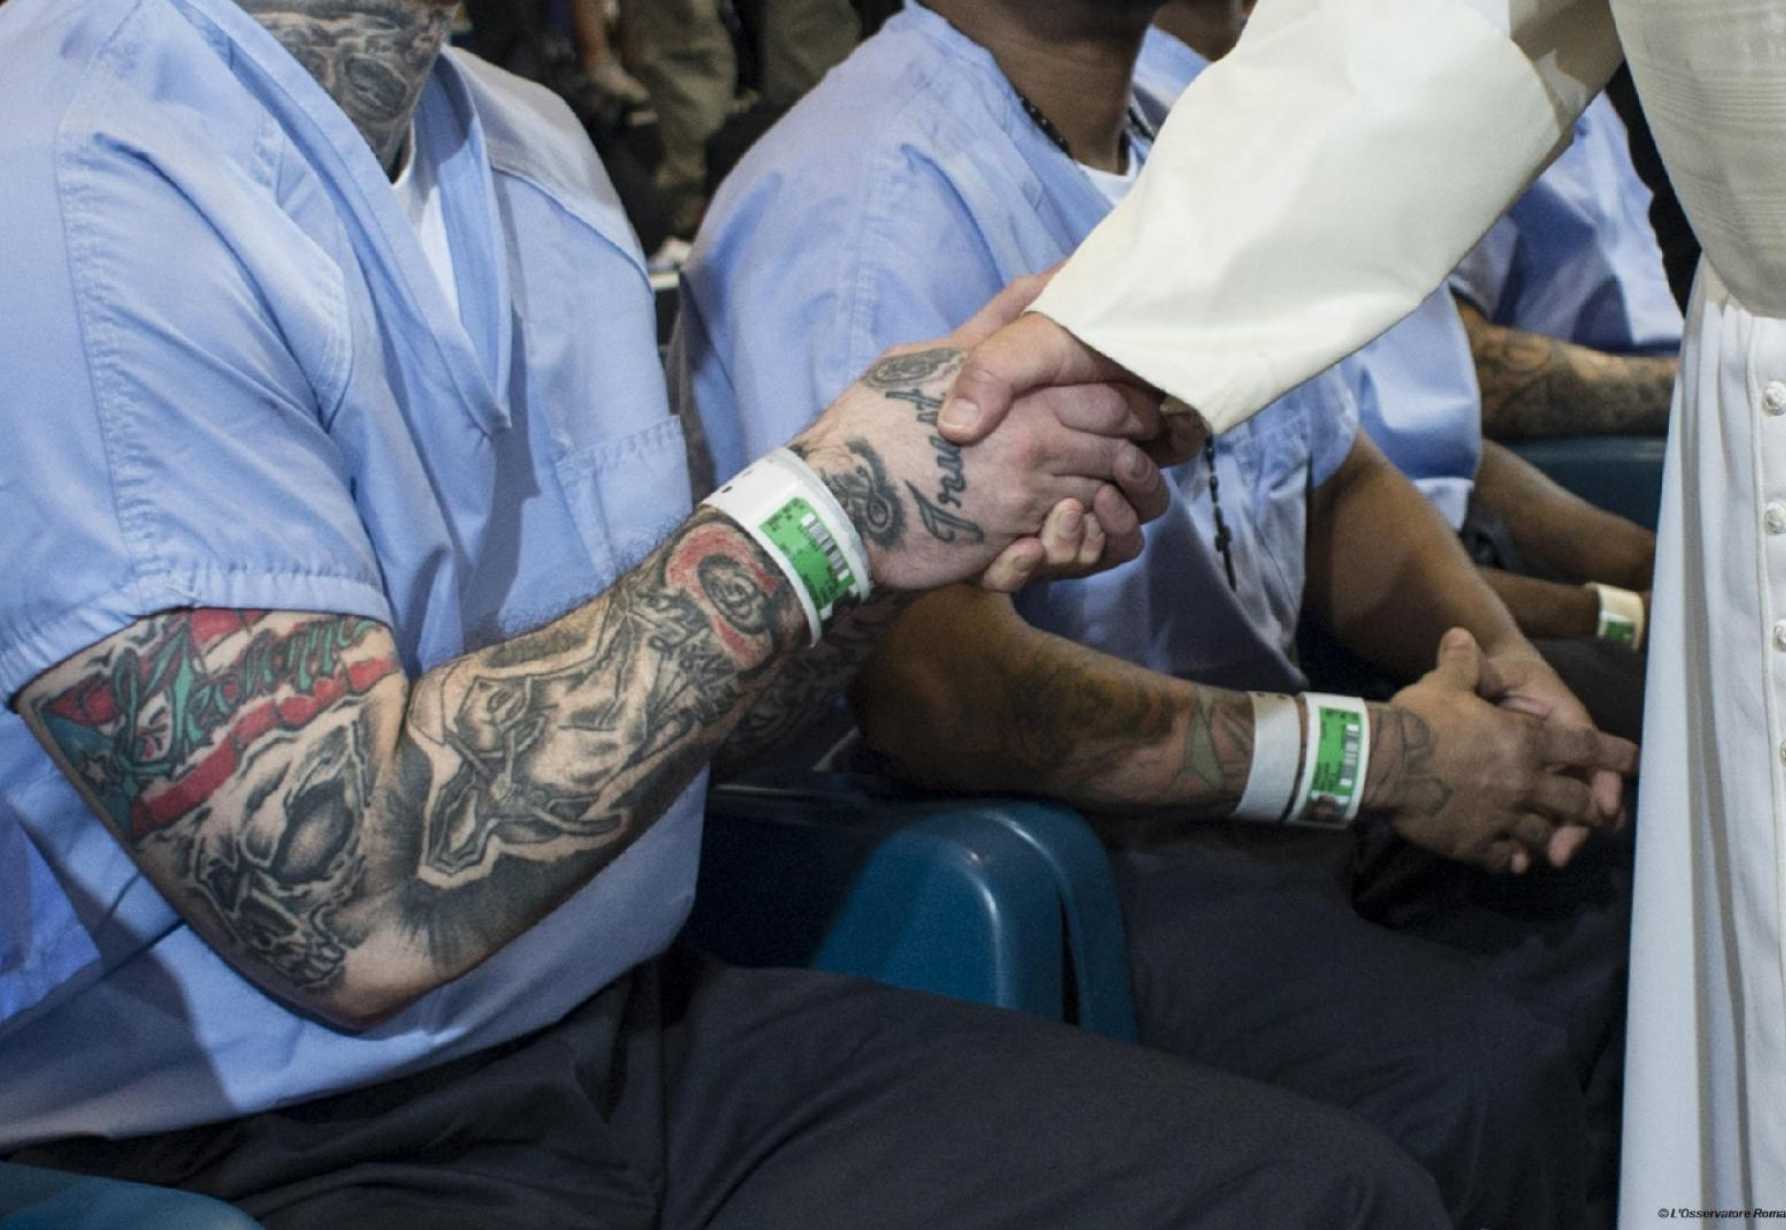 Holy ink: Tattoo culture shows faith is not skin deep, sociologist says